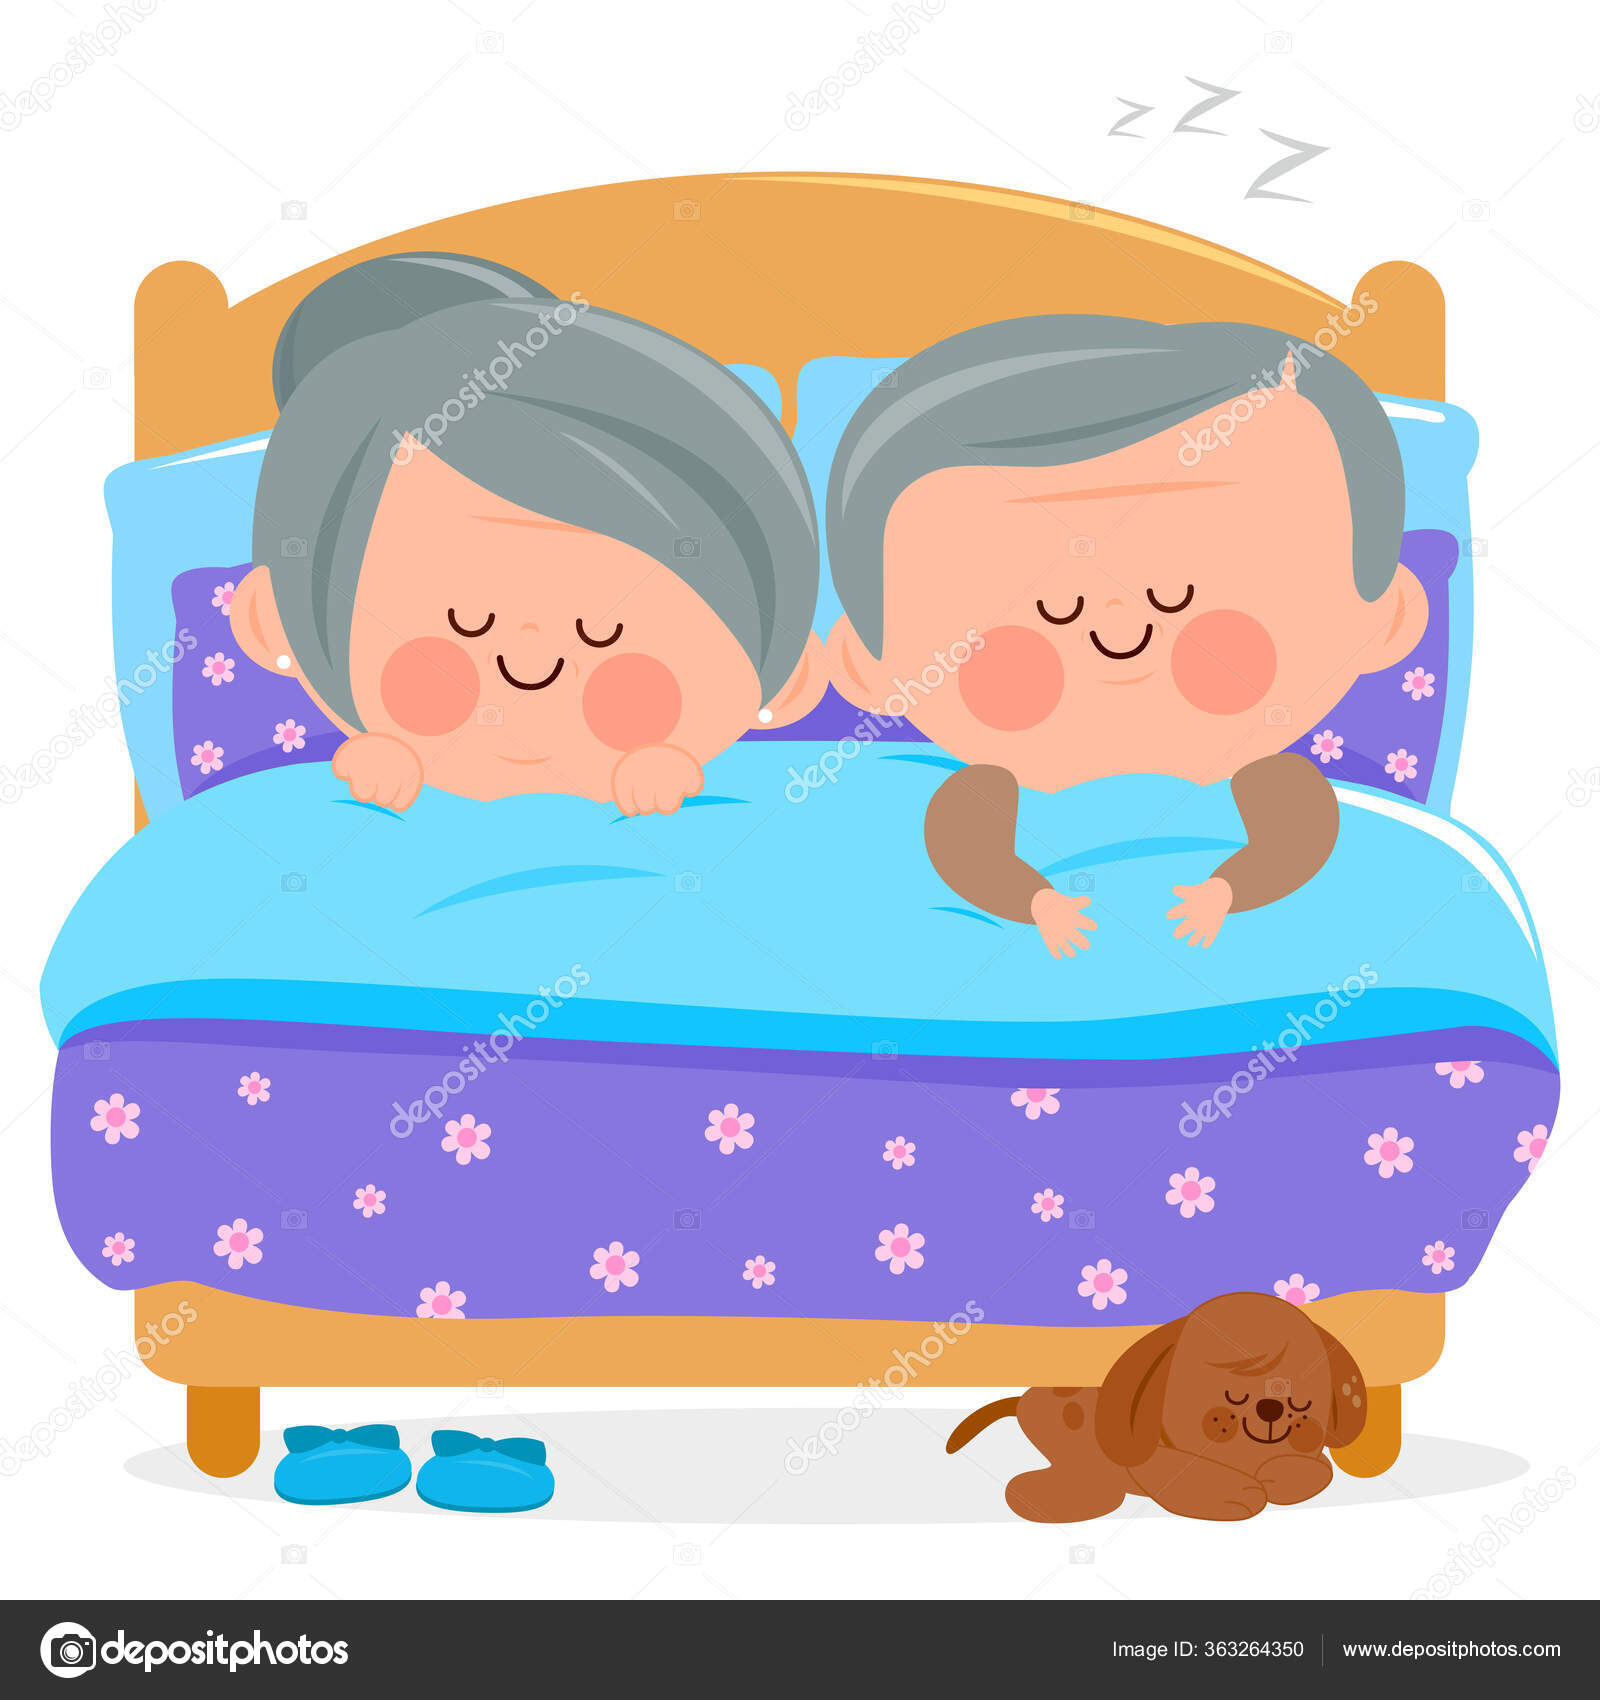 Senior Couple Sleeping Together Bed Vector Illustration Stock Vector Image  by ©stockakia #363264350